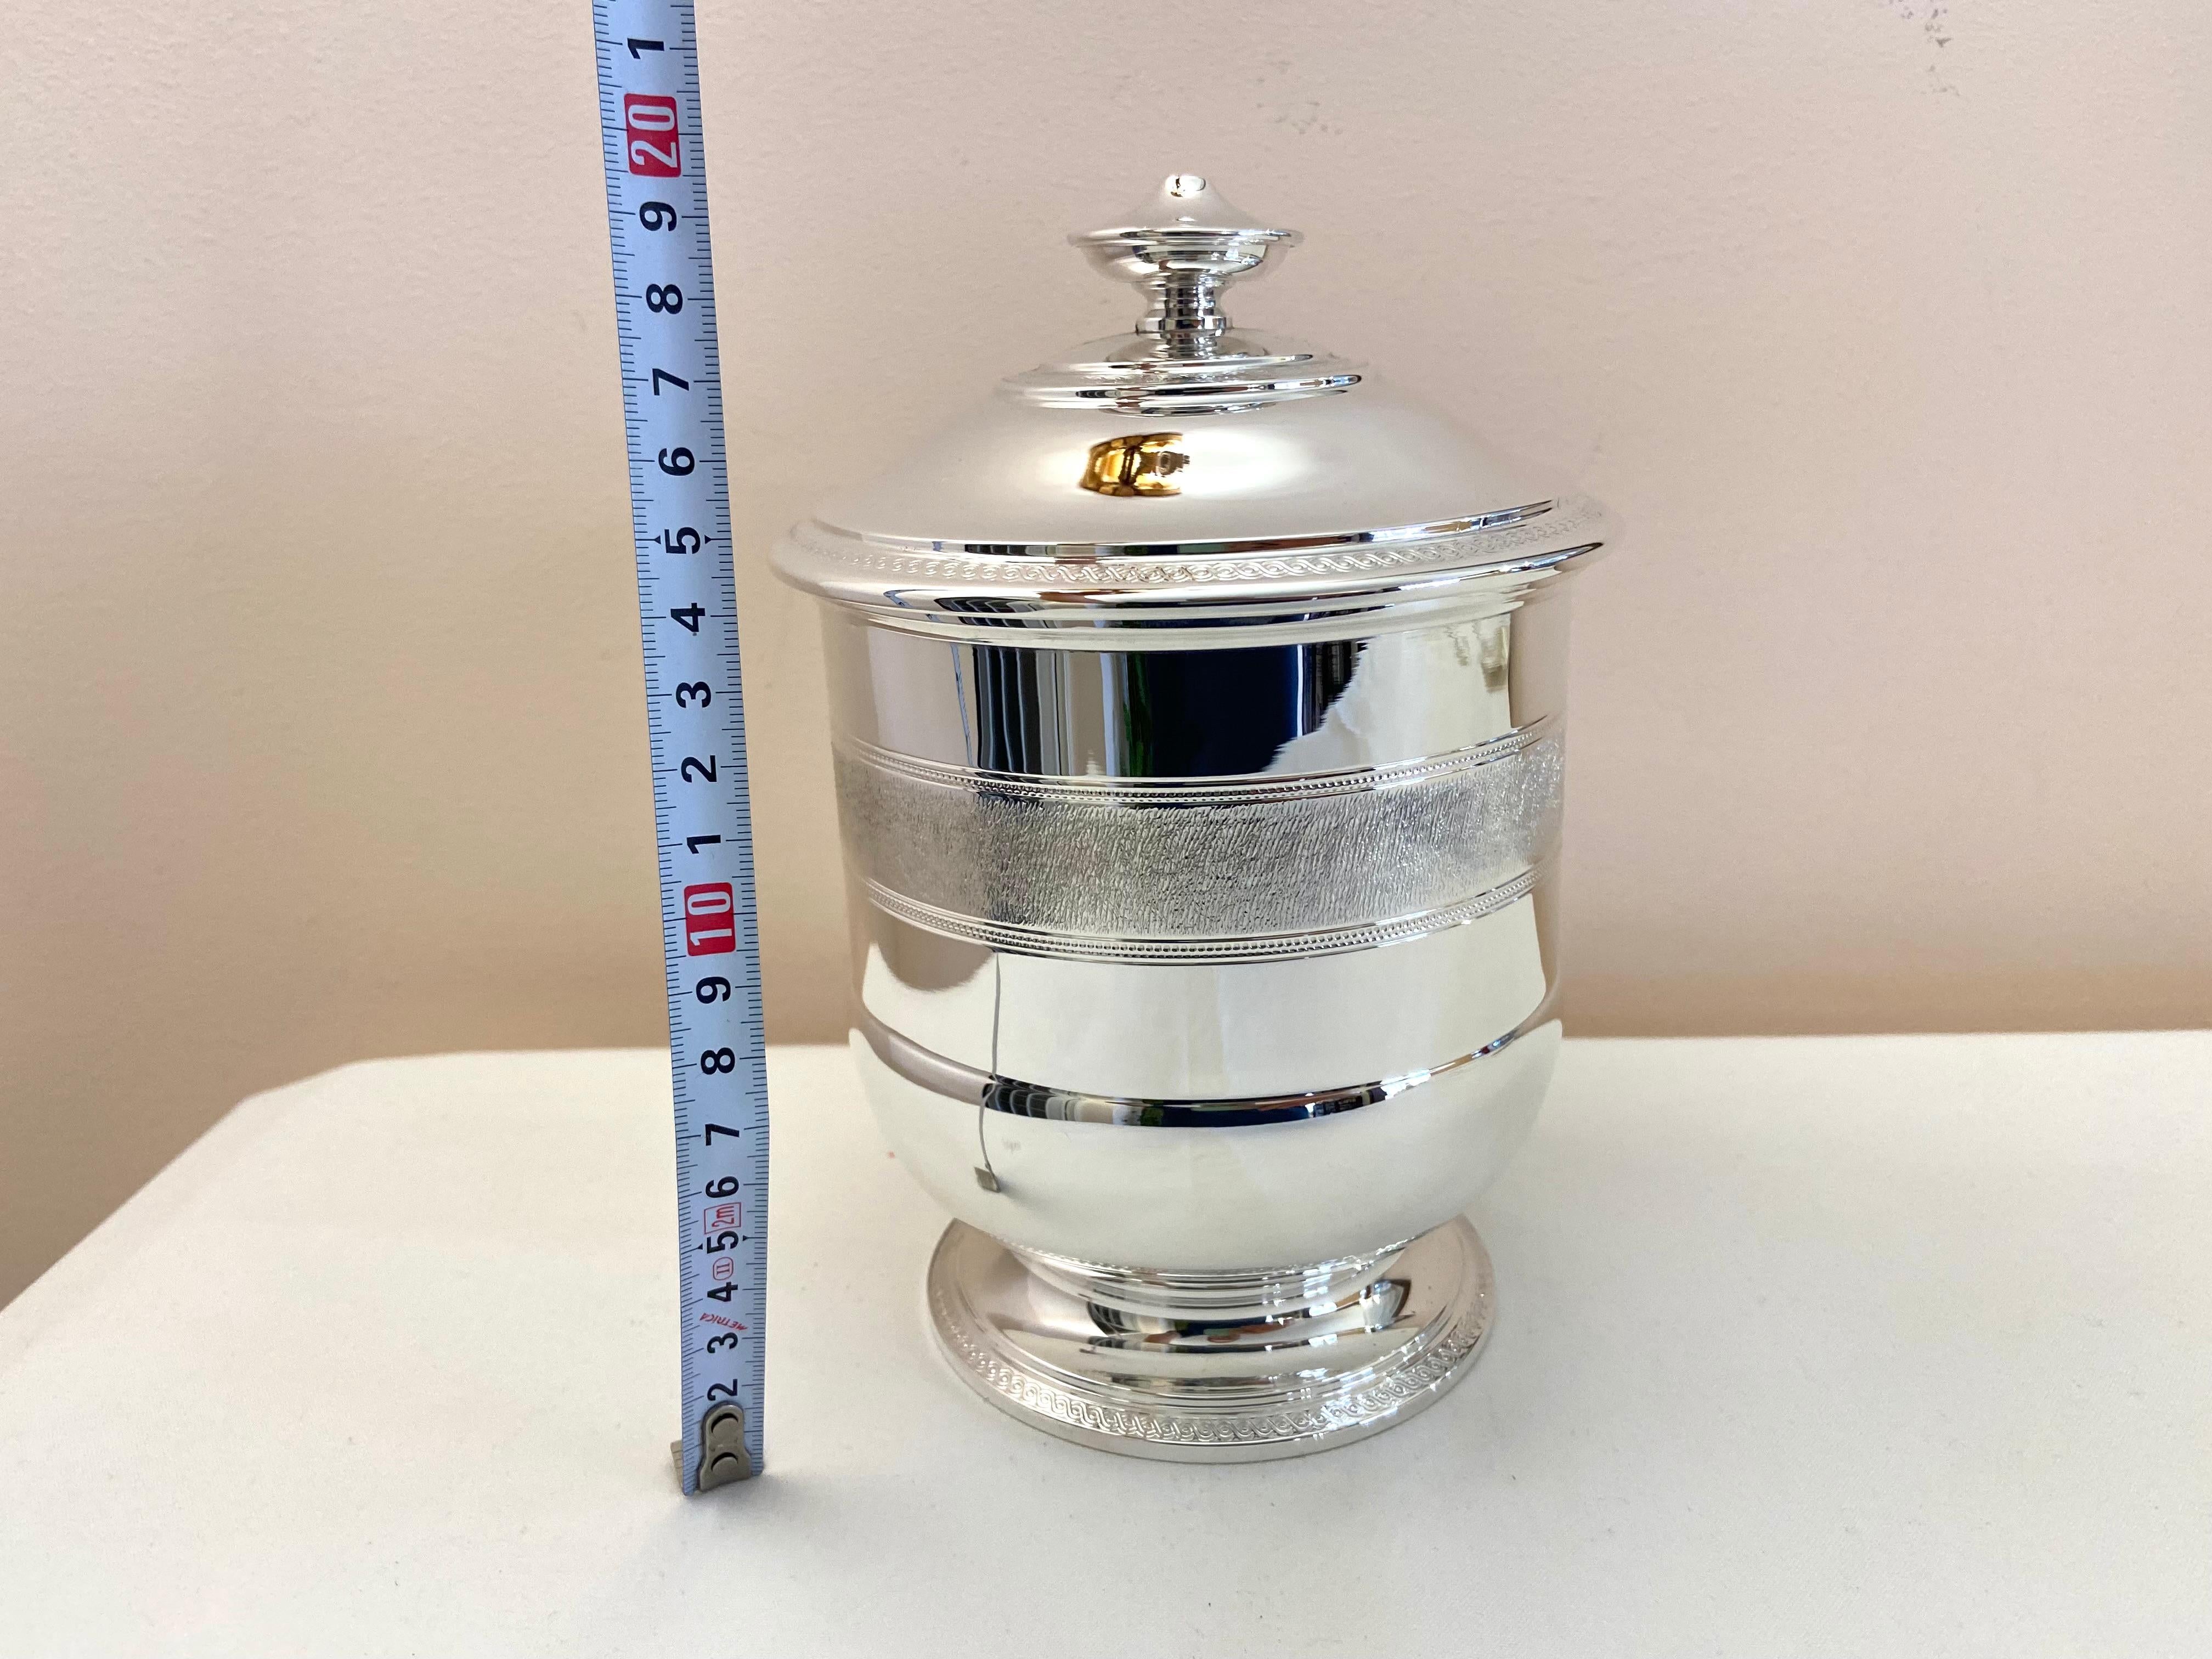 800 silver urn
New, in excellent condition, just factory polished, it has a diameter of 14 cm and is 20 cm high. It weighs 550 grams. Made by an Italian silversmith, as evidenced by the factory stamps which also attest to the 800 thousandth silver